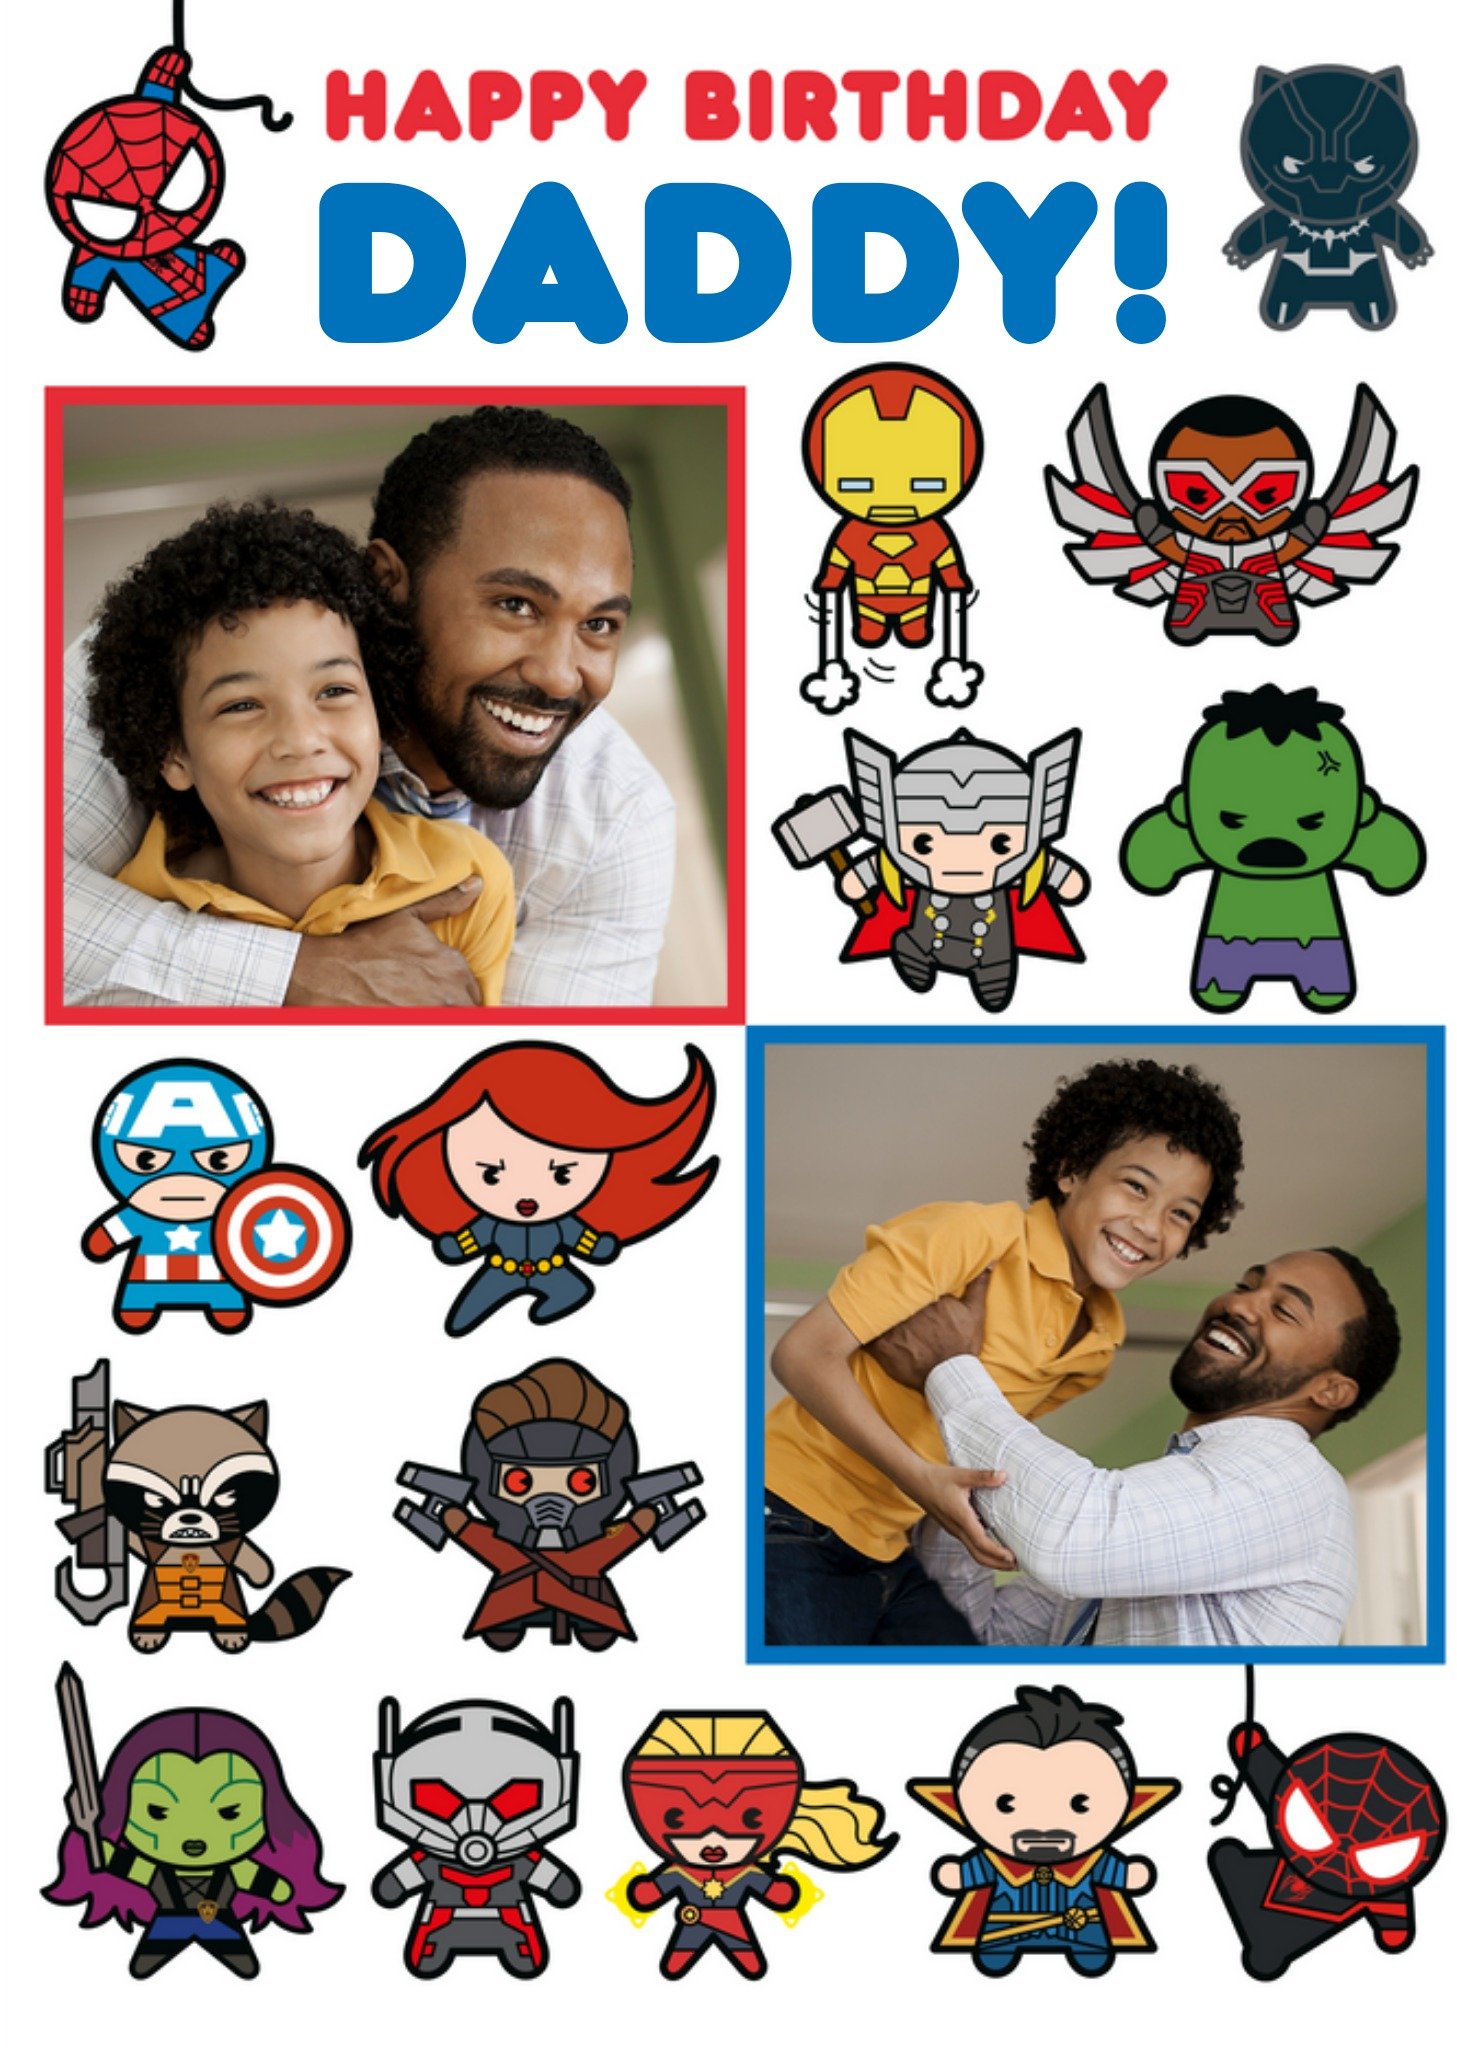 The Avengers Marvel Comics Heroes Happy Birthday Daddy Card, Large